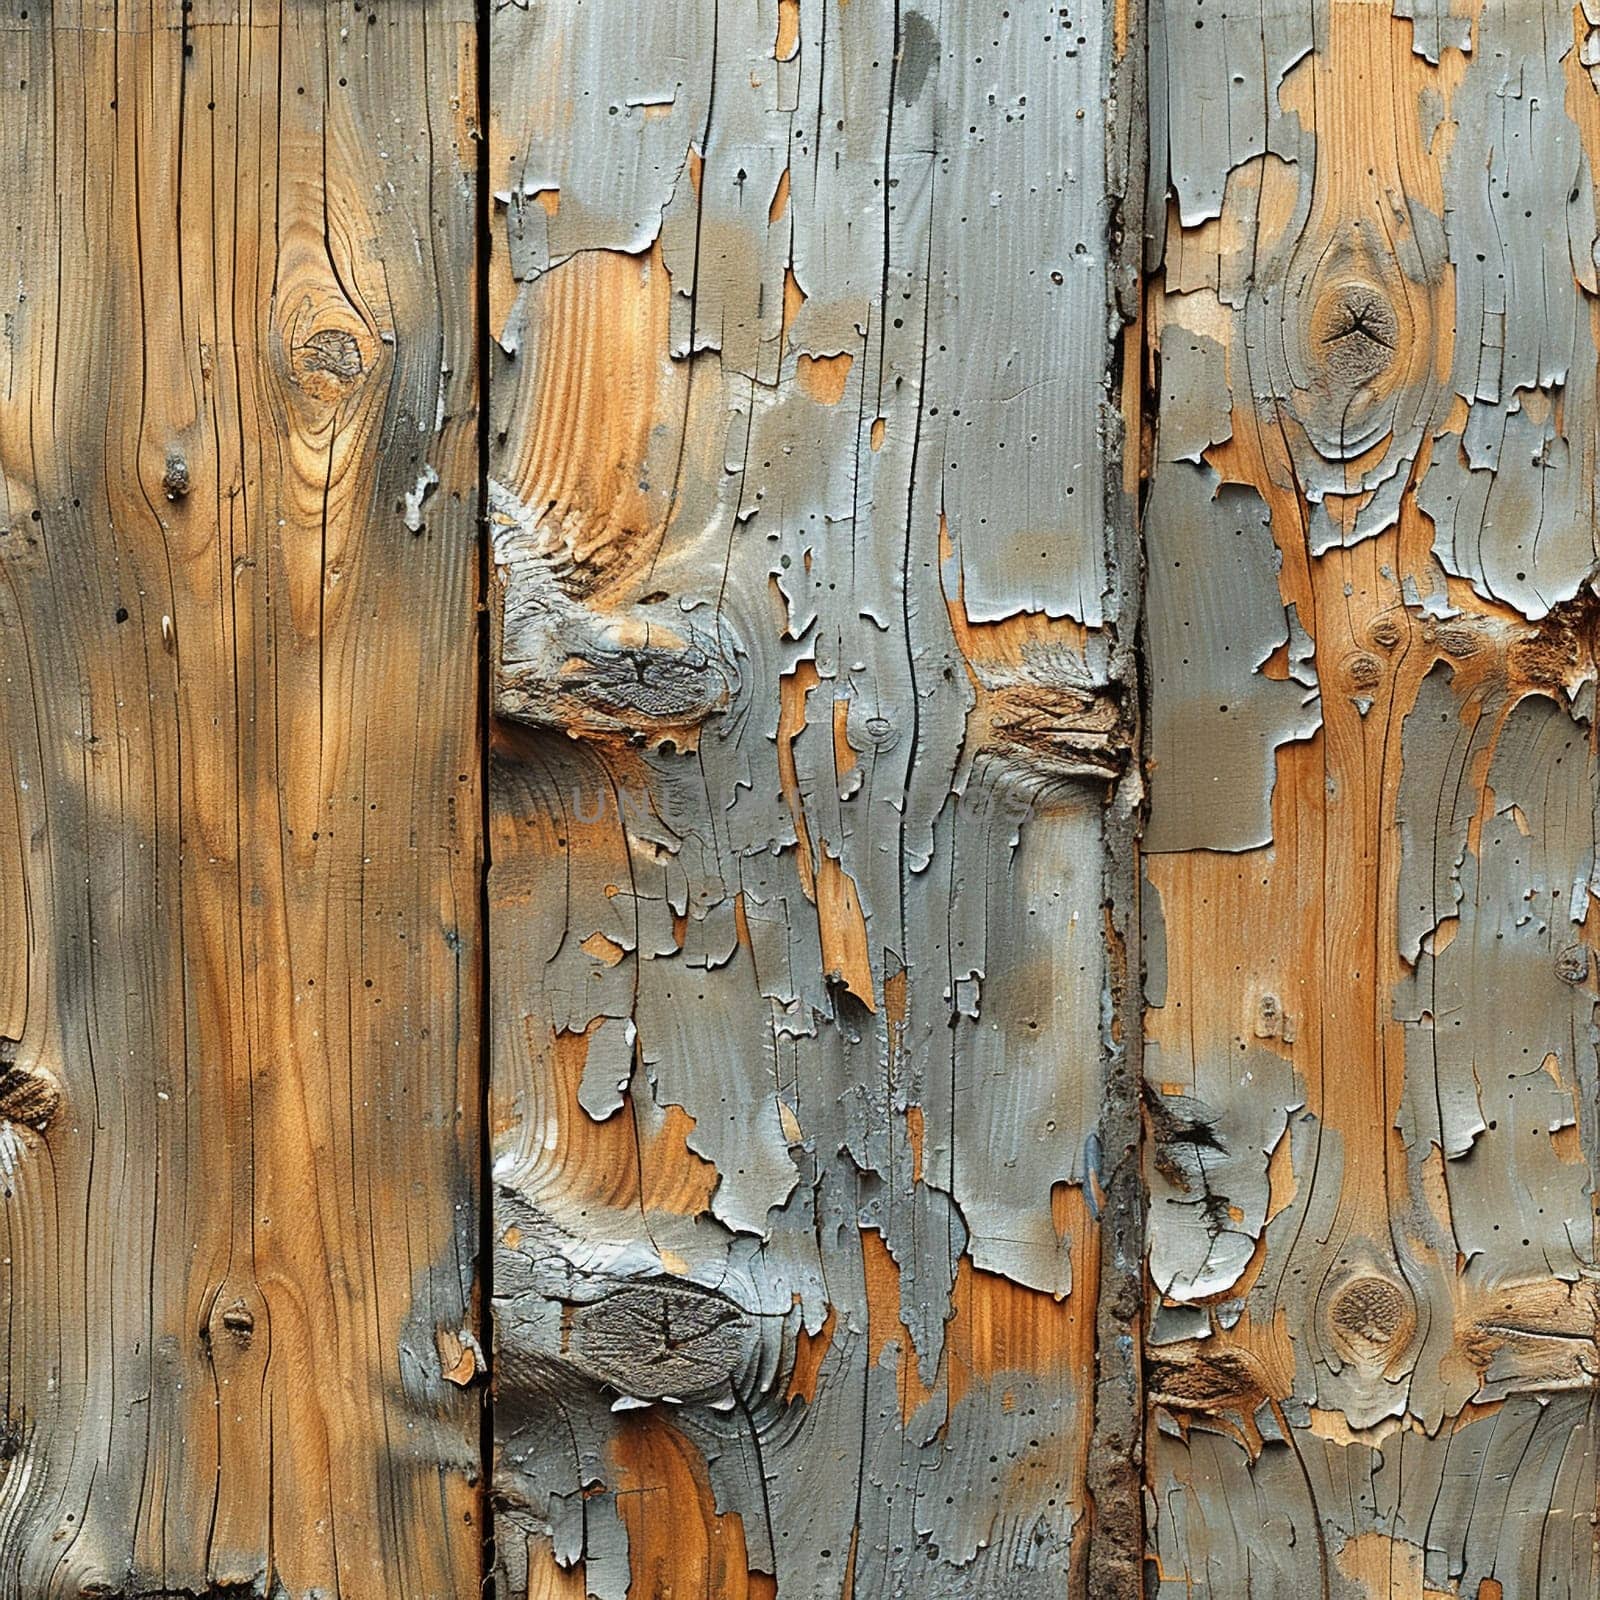 Rustic wood grain texture close-up, ideal for vintage and country-themed designs.